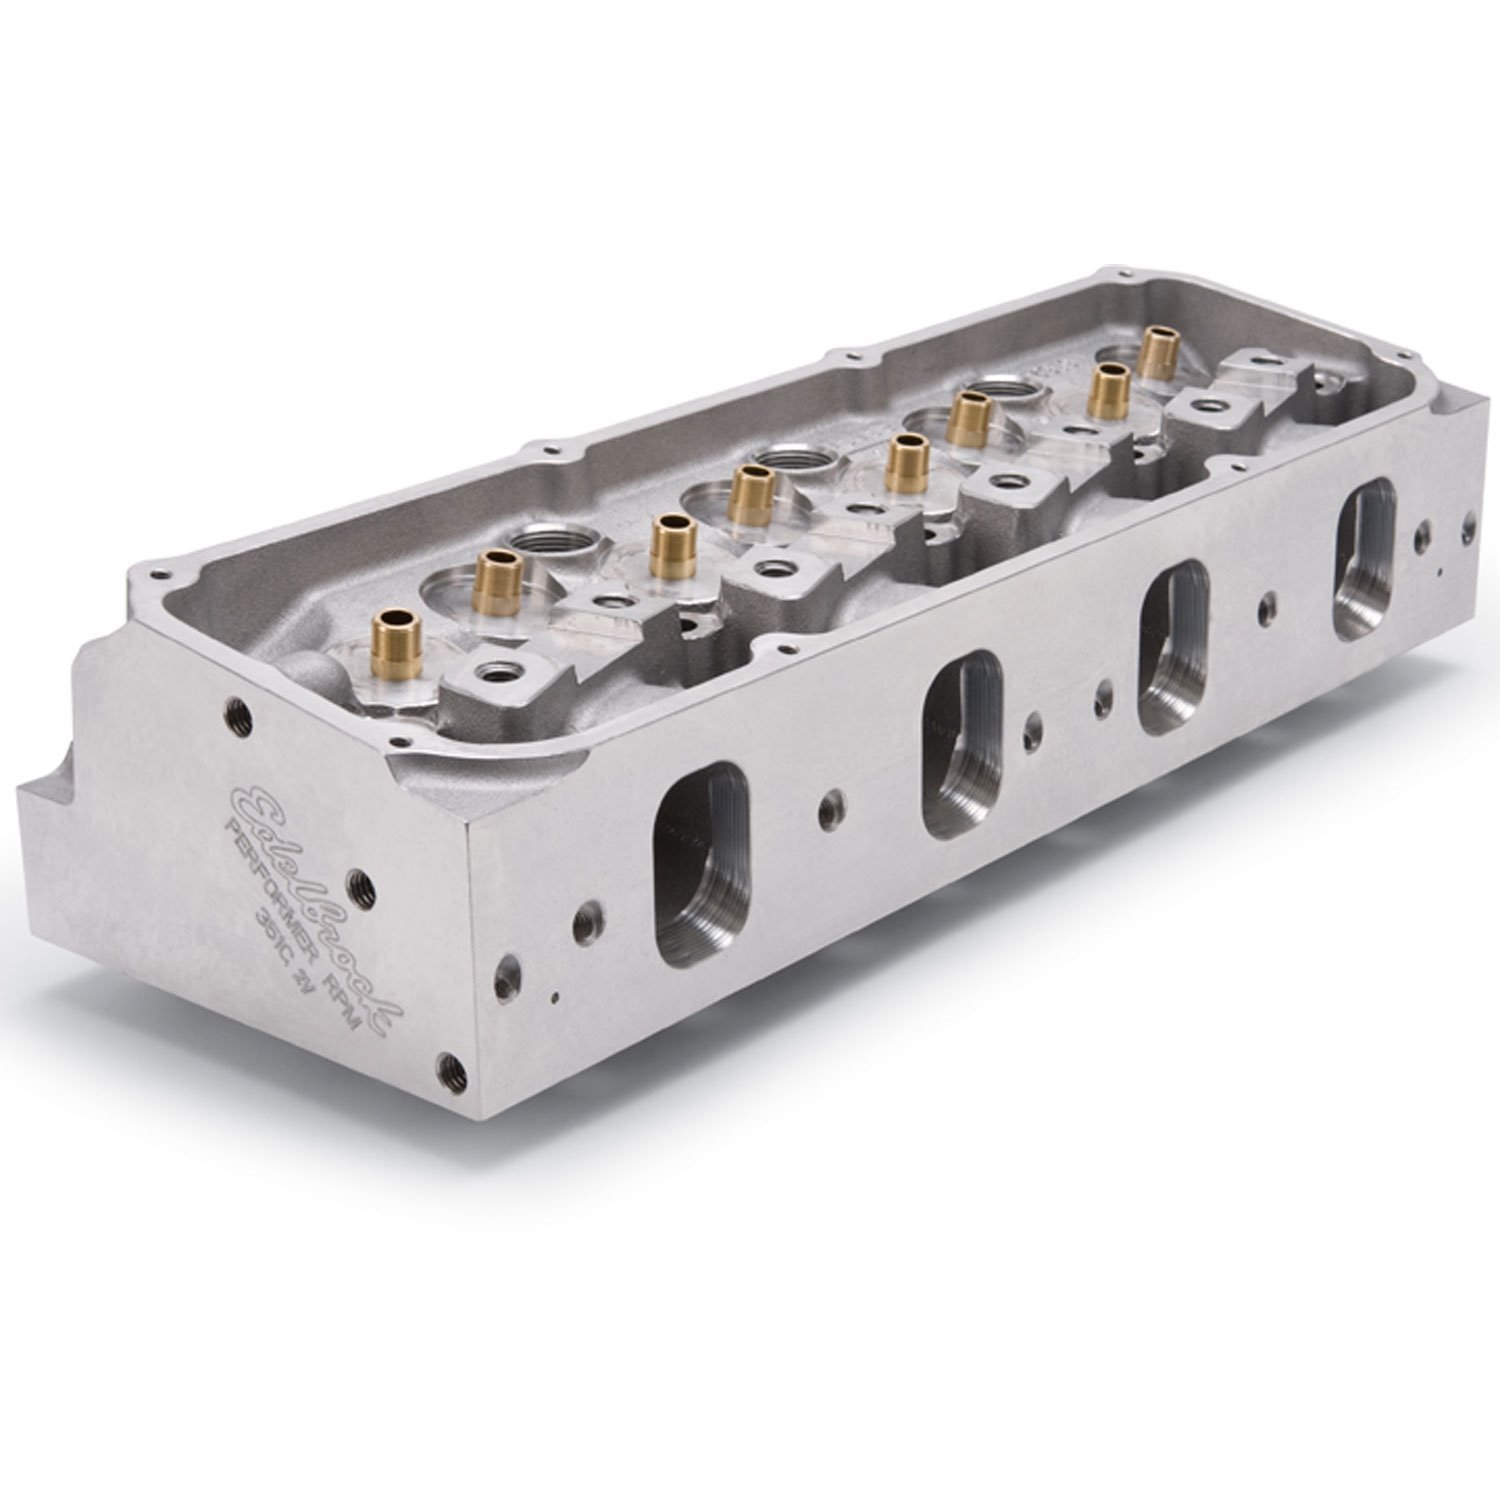 Performer RPM Cylinder Heads for Ford 351C/351M/400M